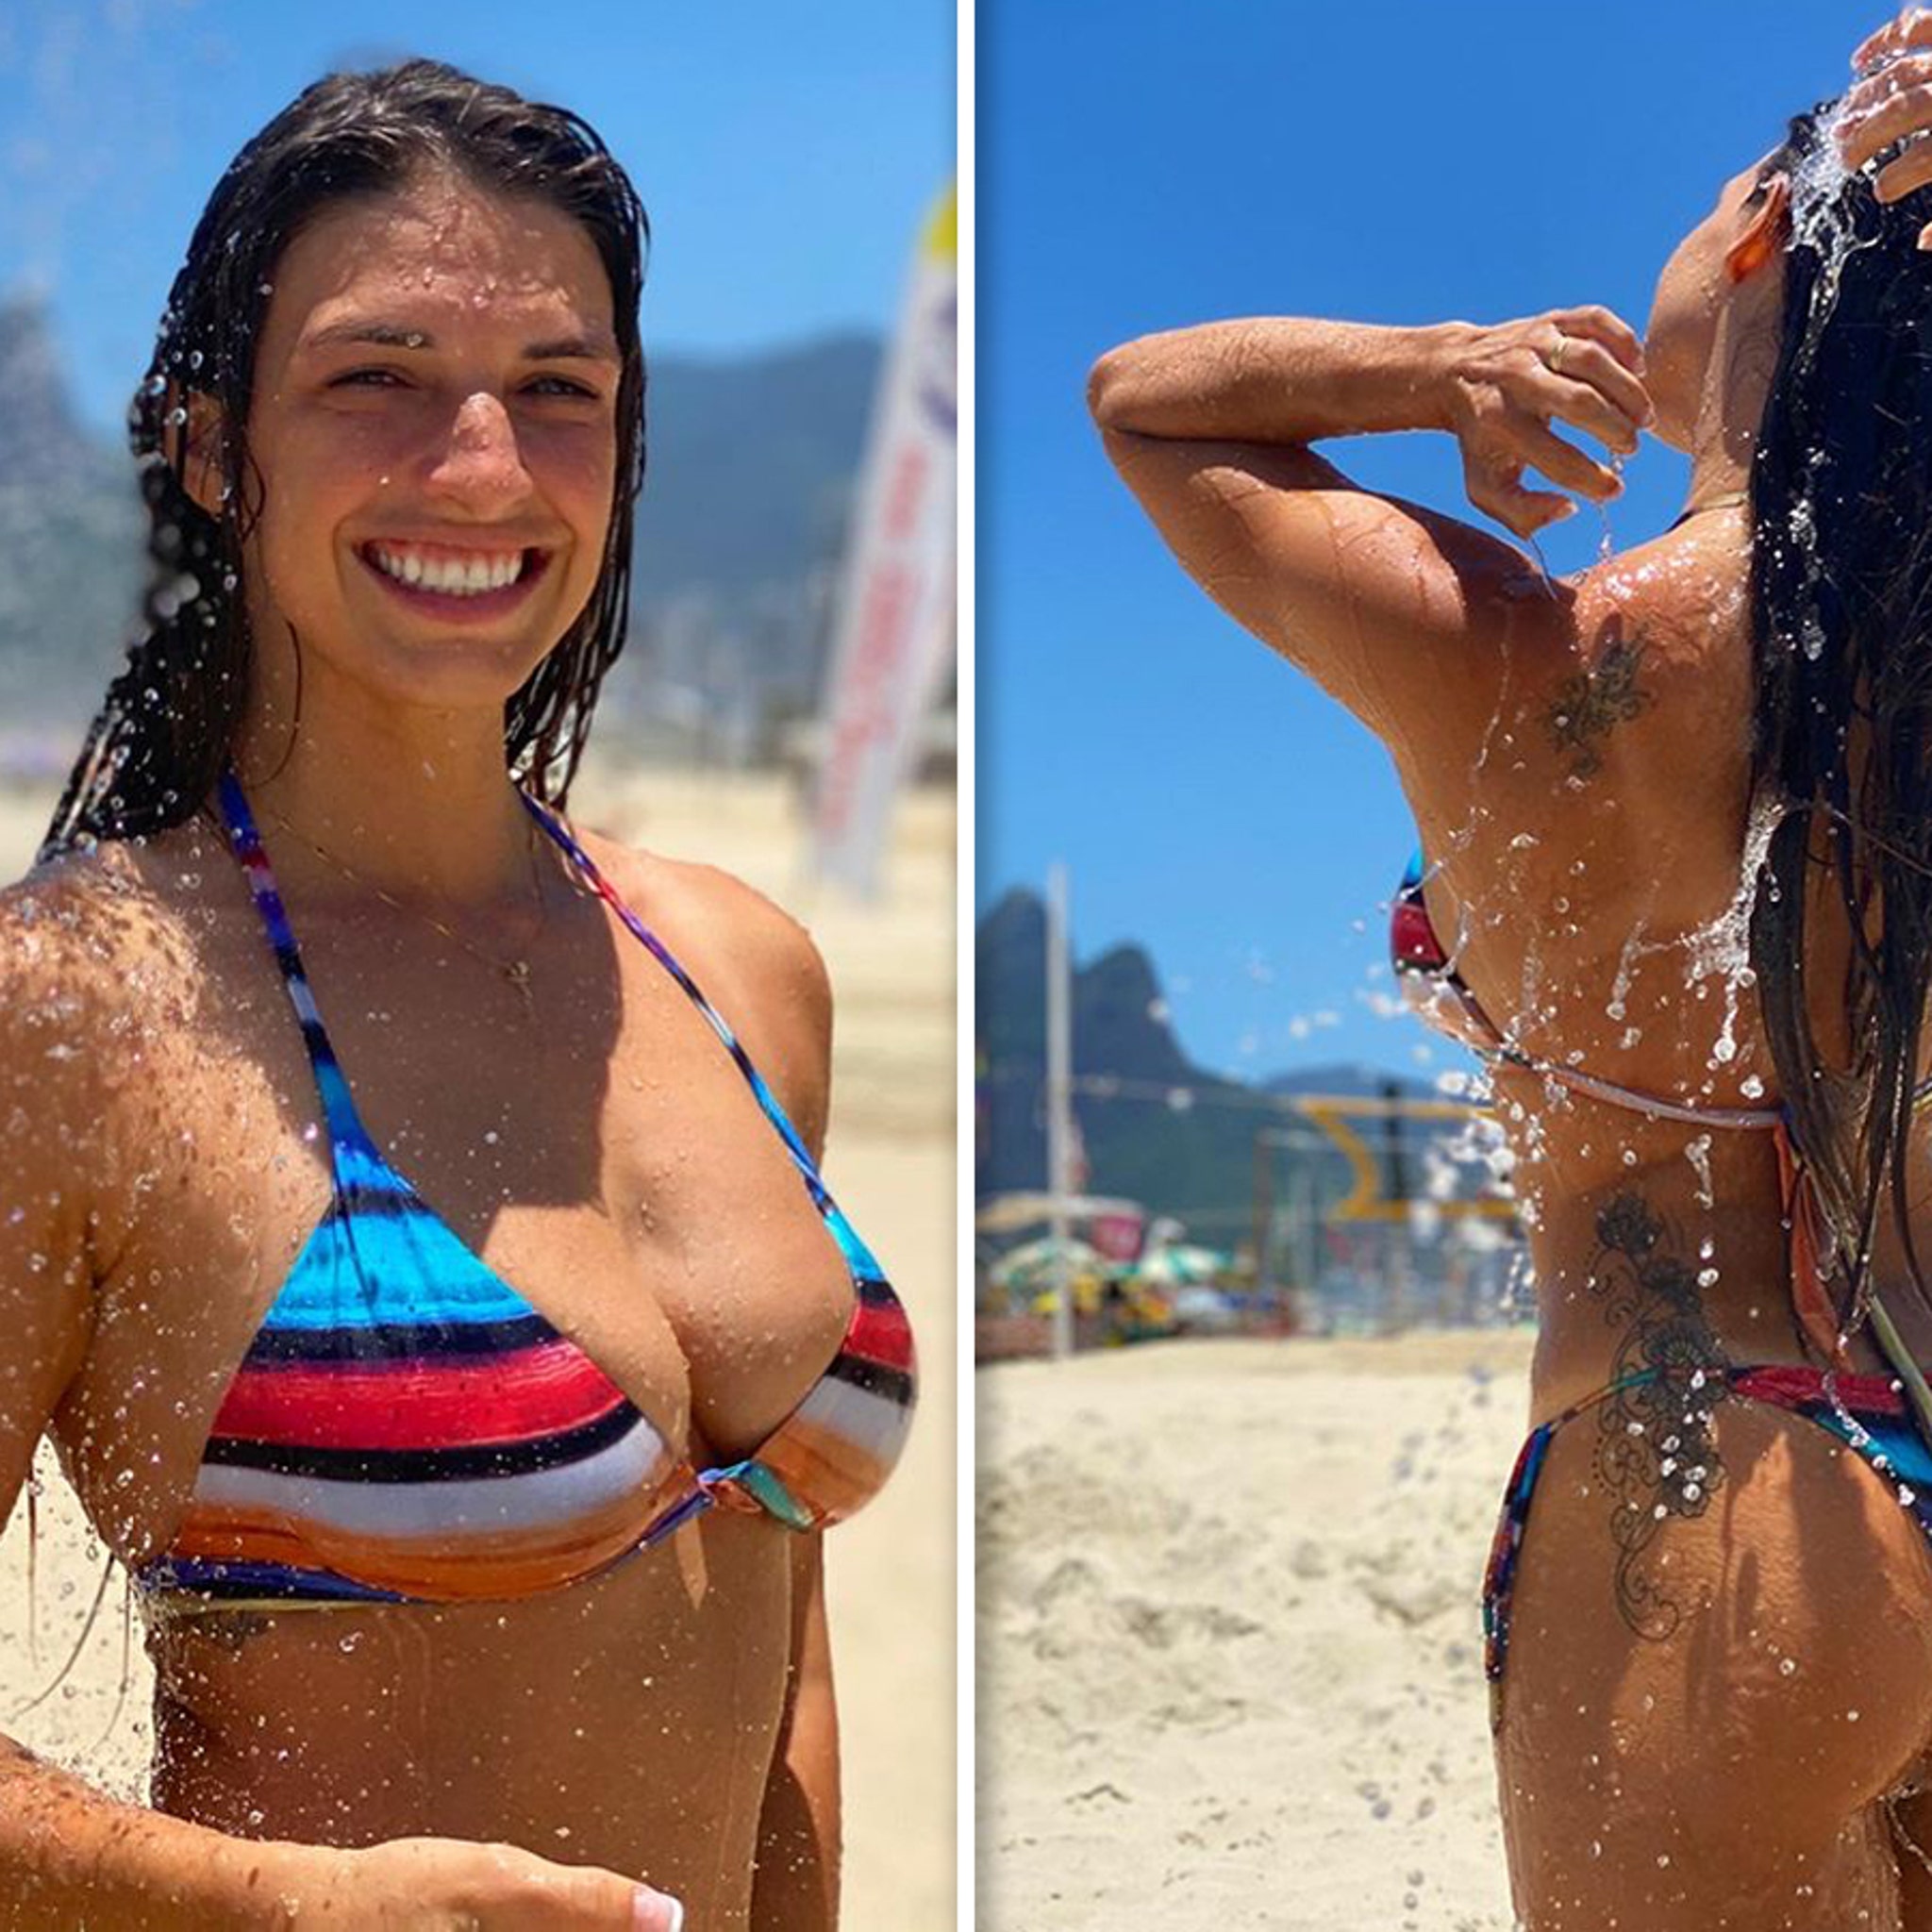 david parrill recommends mackenzie dern naked pic